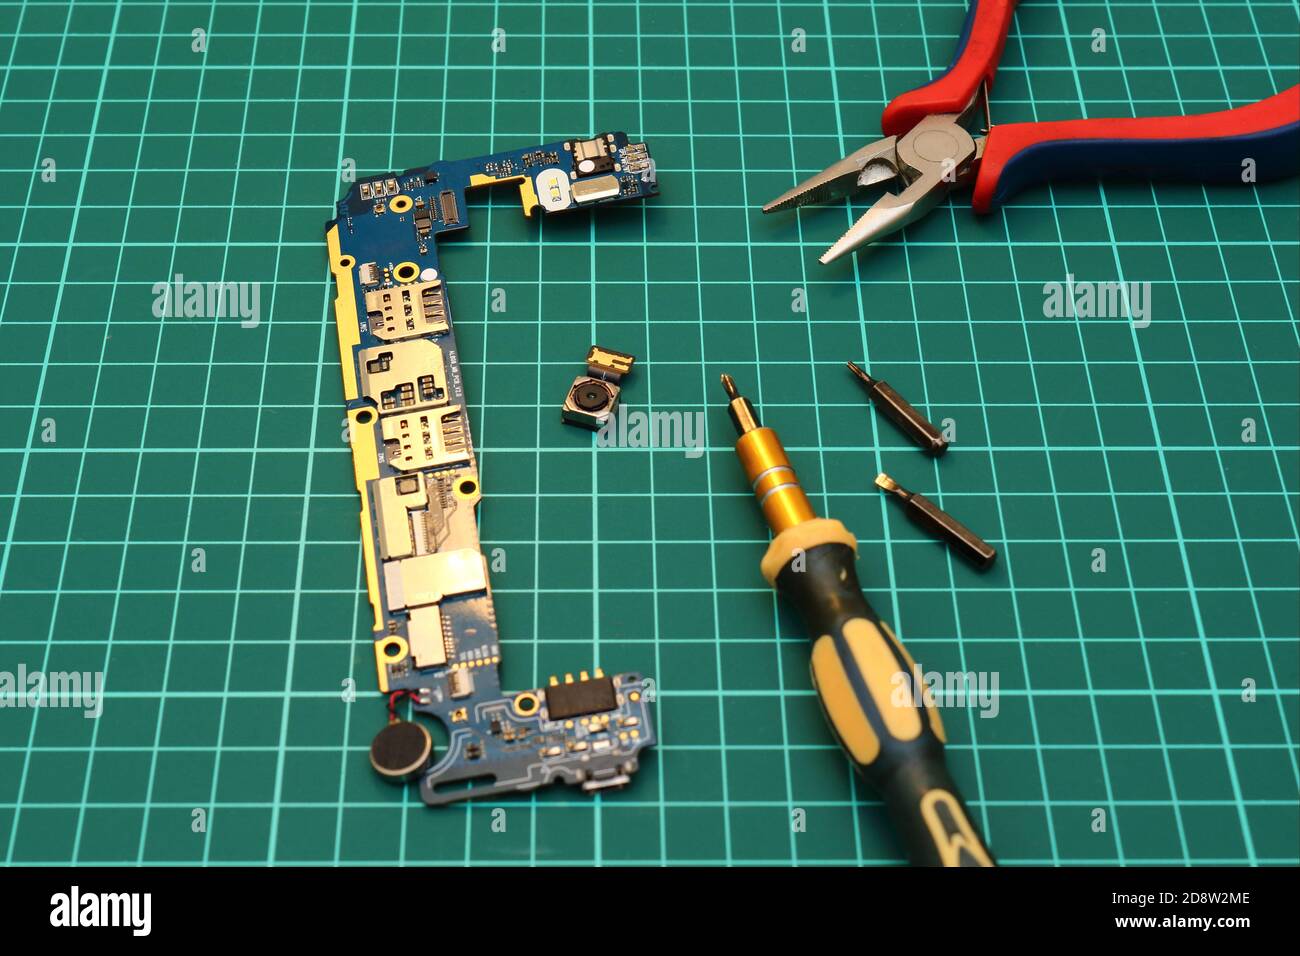 Mobile phone service. Close-up of  repairing smartphone with screwdriver and pliers on green pad. Stock Photo